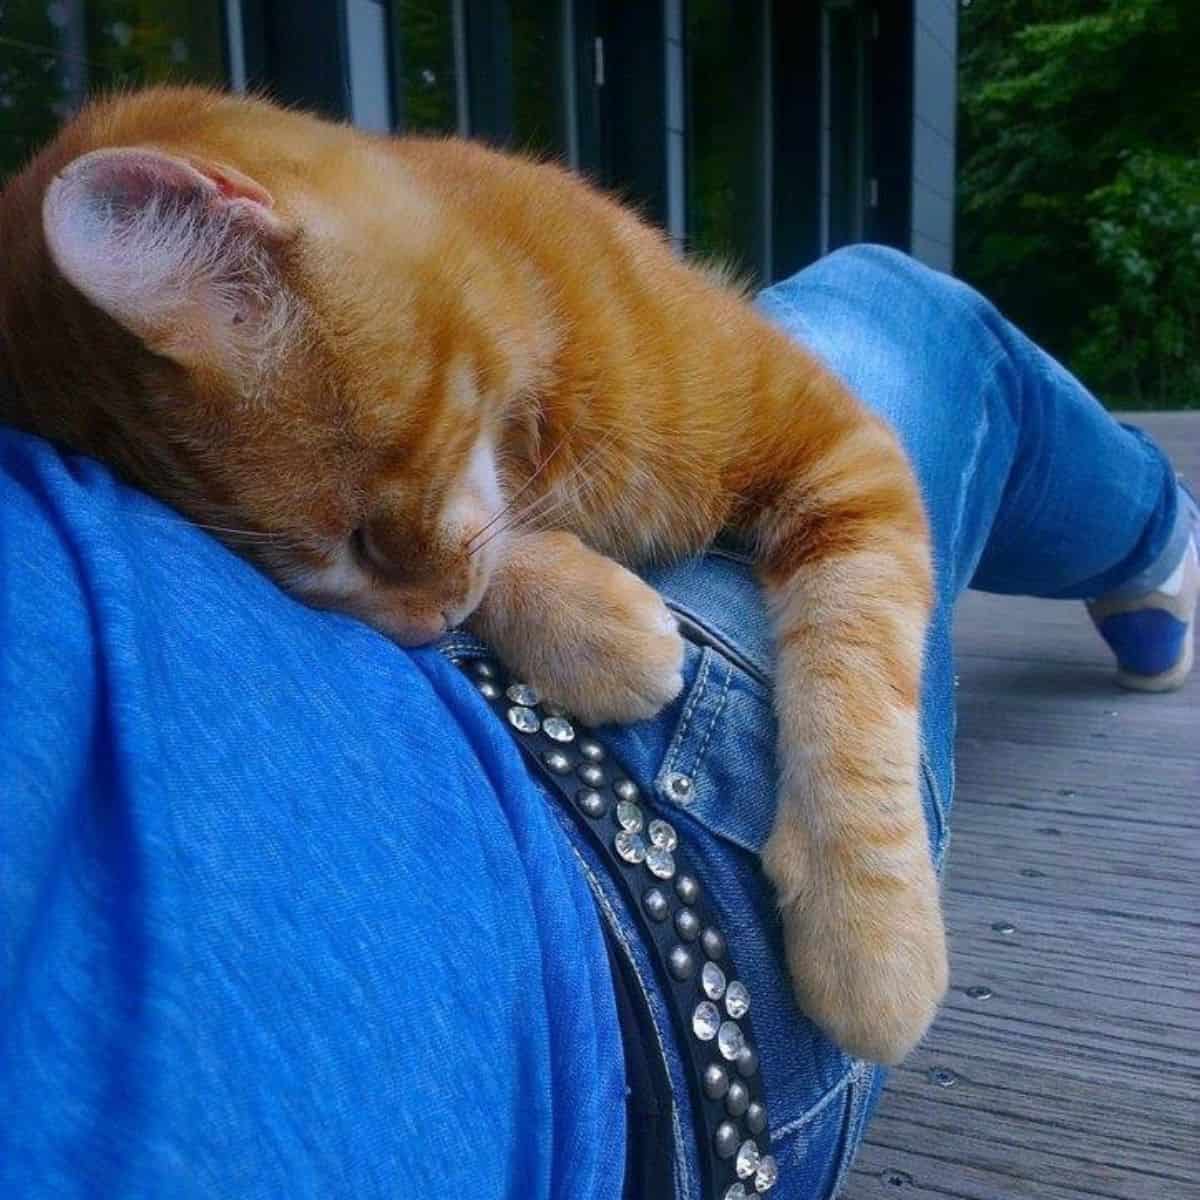 a yellow cat sleeps on a man's side